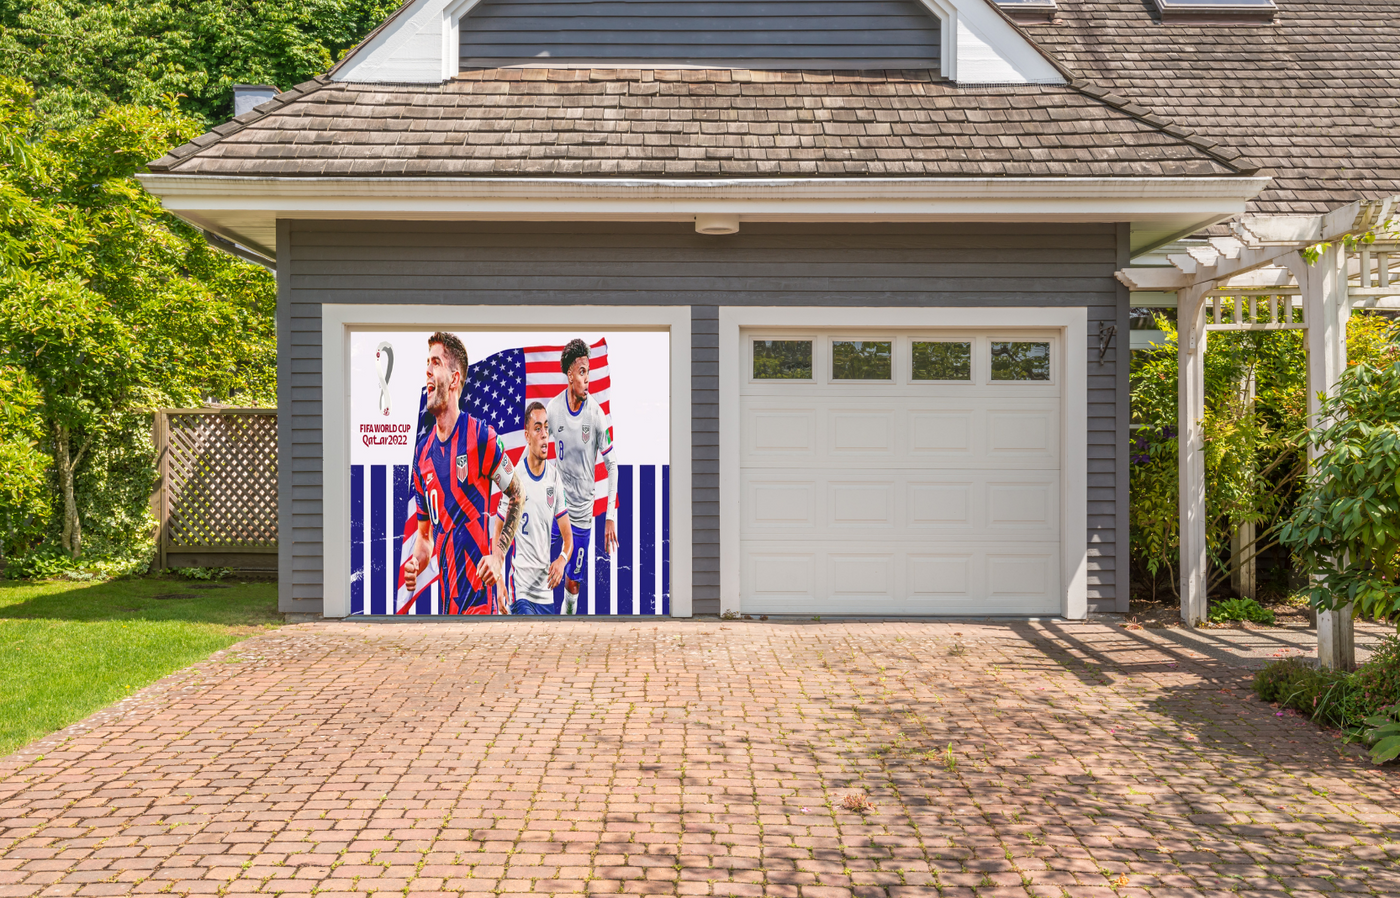 World Cup United States 2022 Garage Door Cover